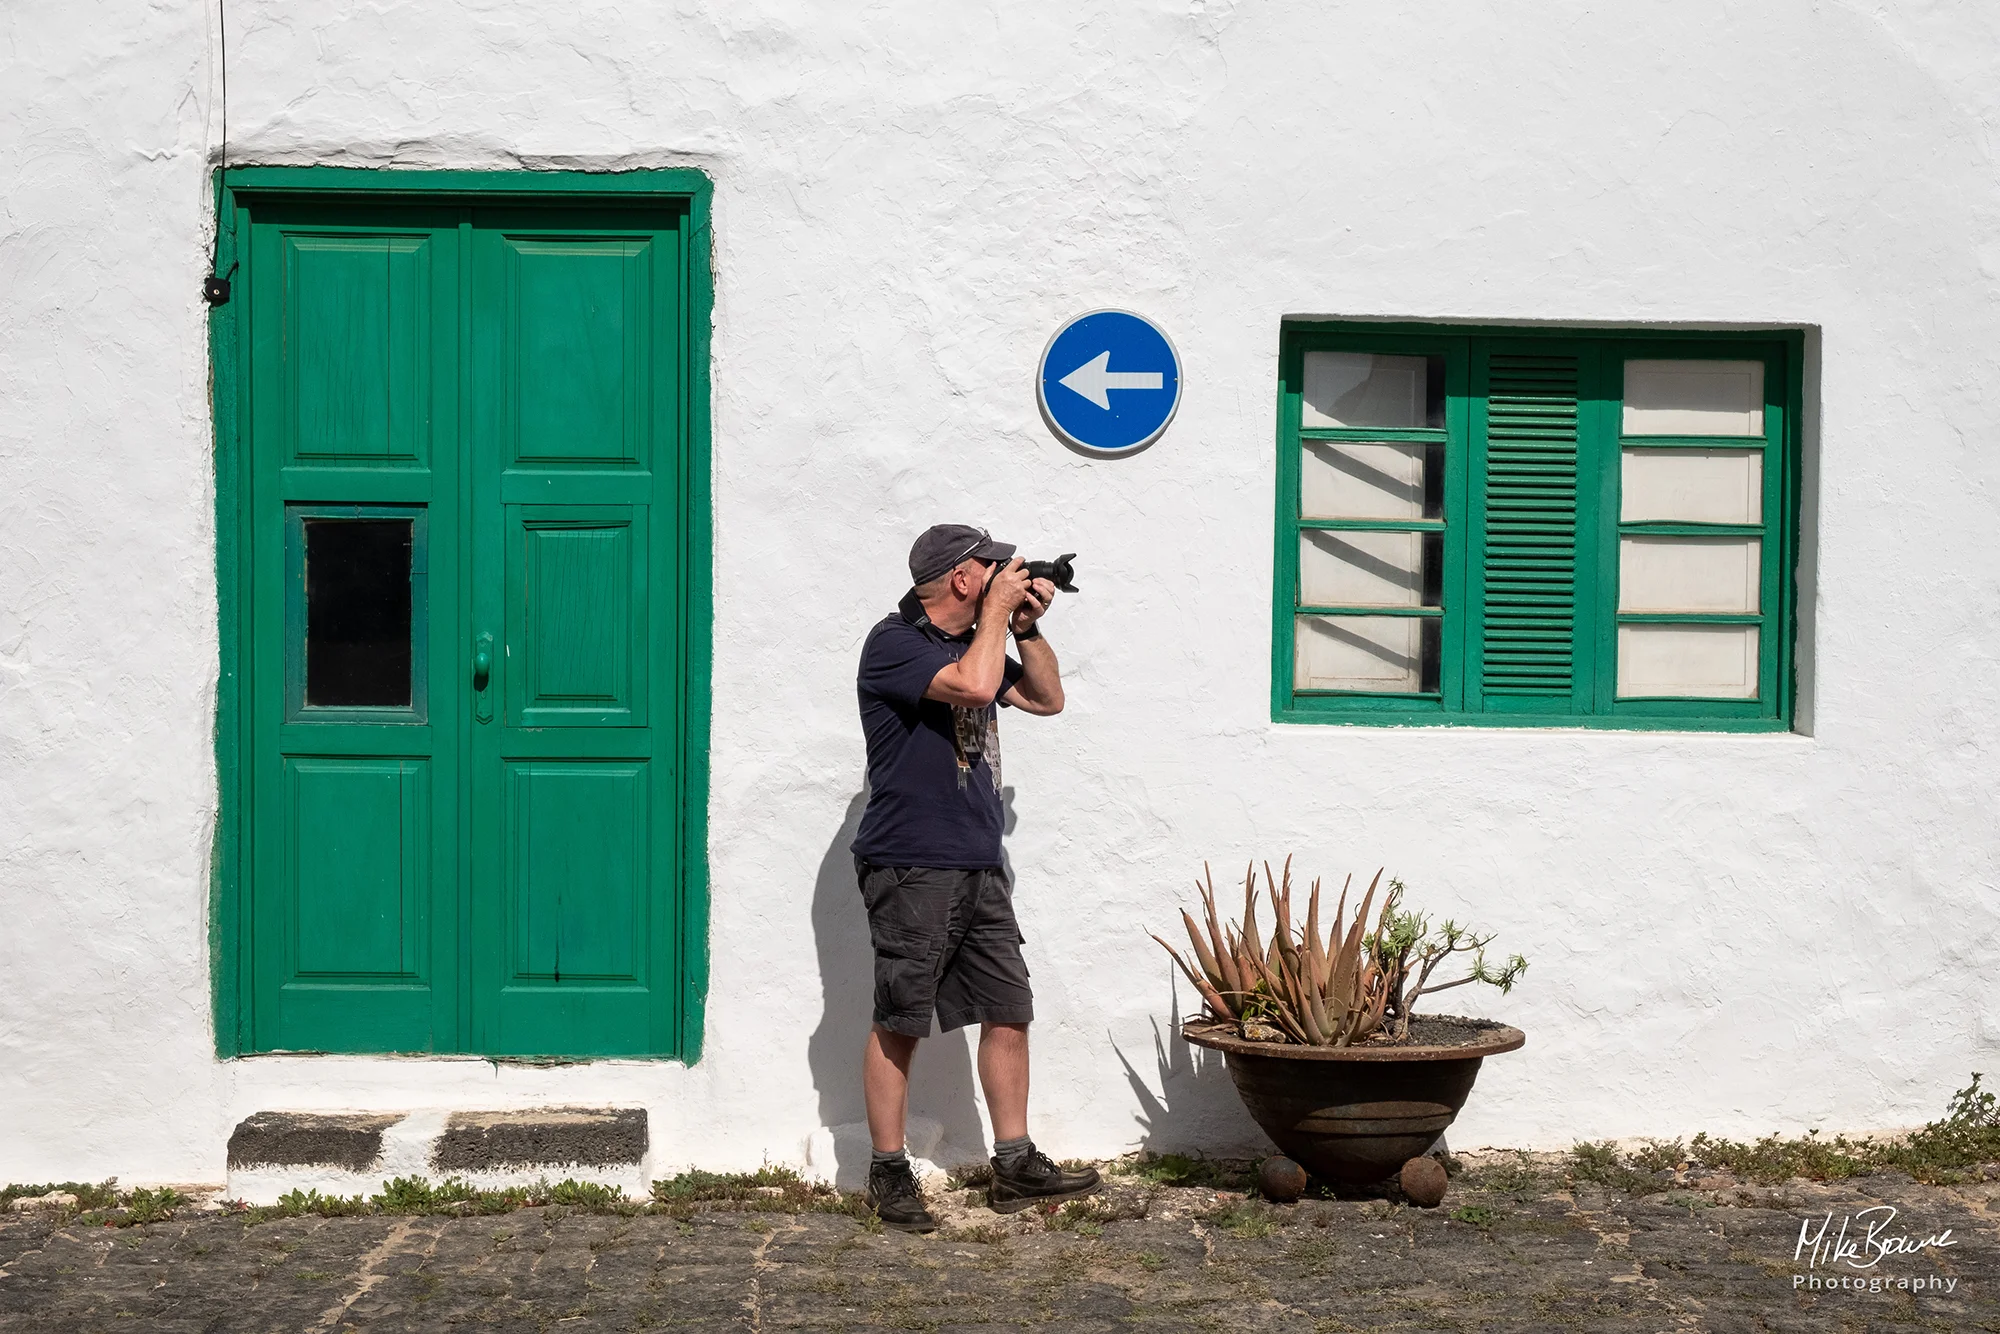 Man with camera taking a photo in front of a white wall with a blue arrow pointing in opposite direction in Teguise, Lanzarote